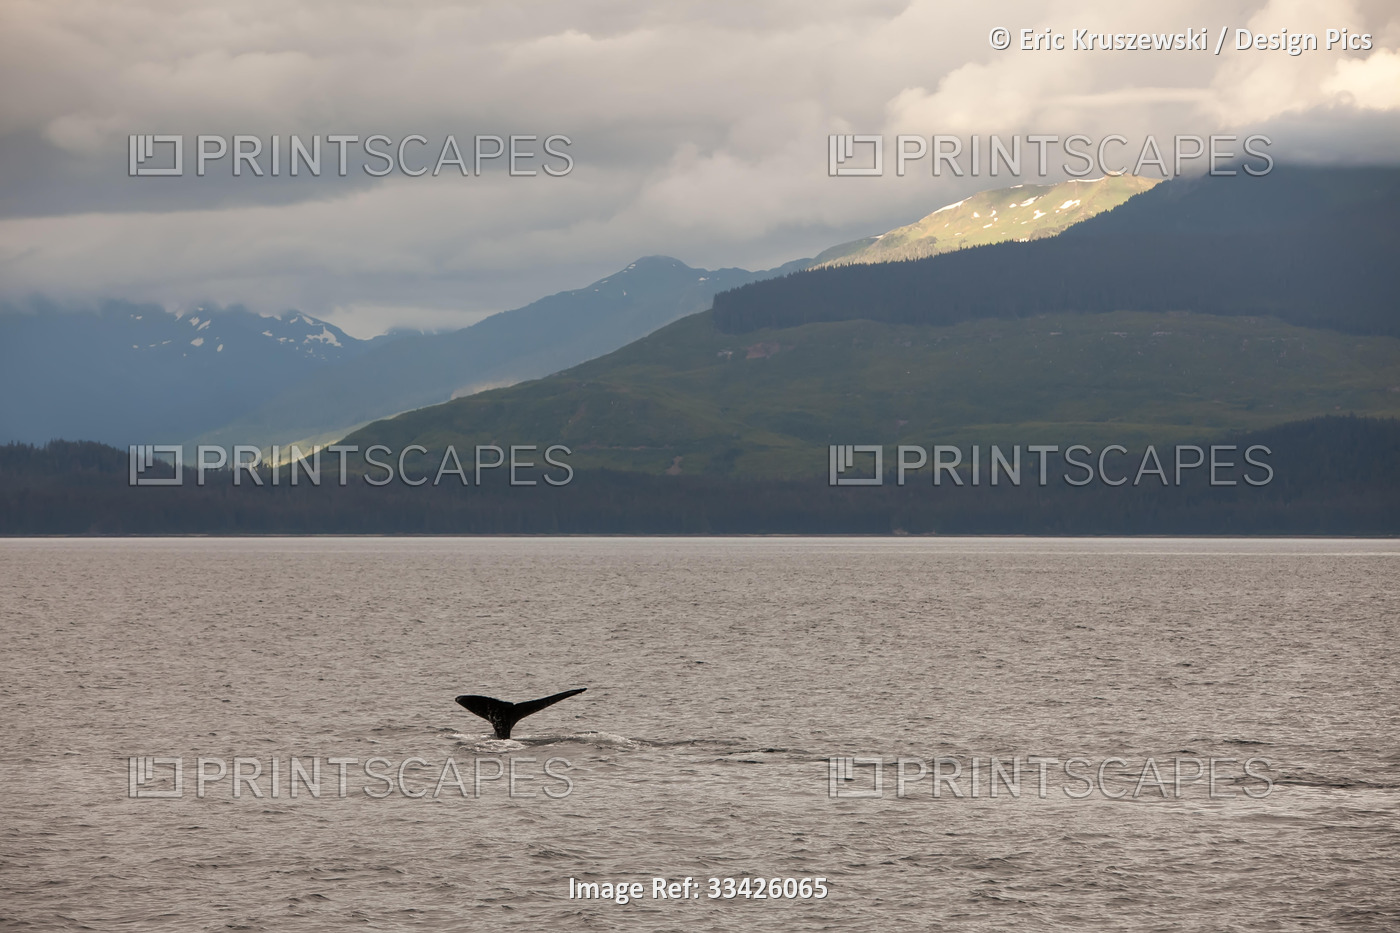 Among mountains and lush hillsides, the tail fin of a humpback whale breaches ...